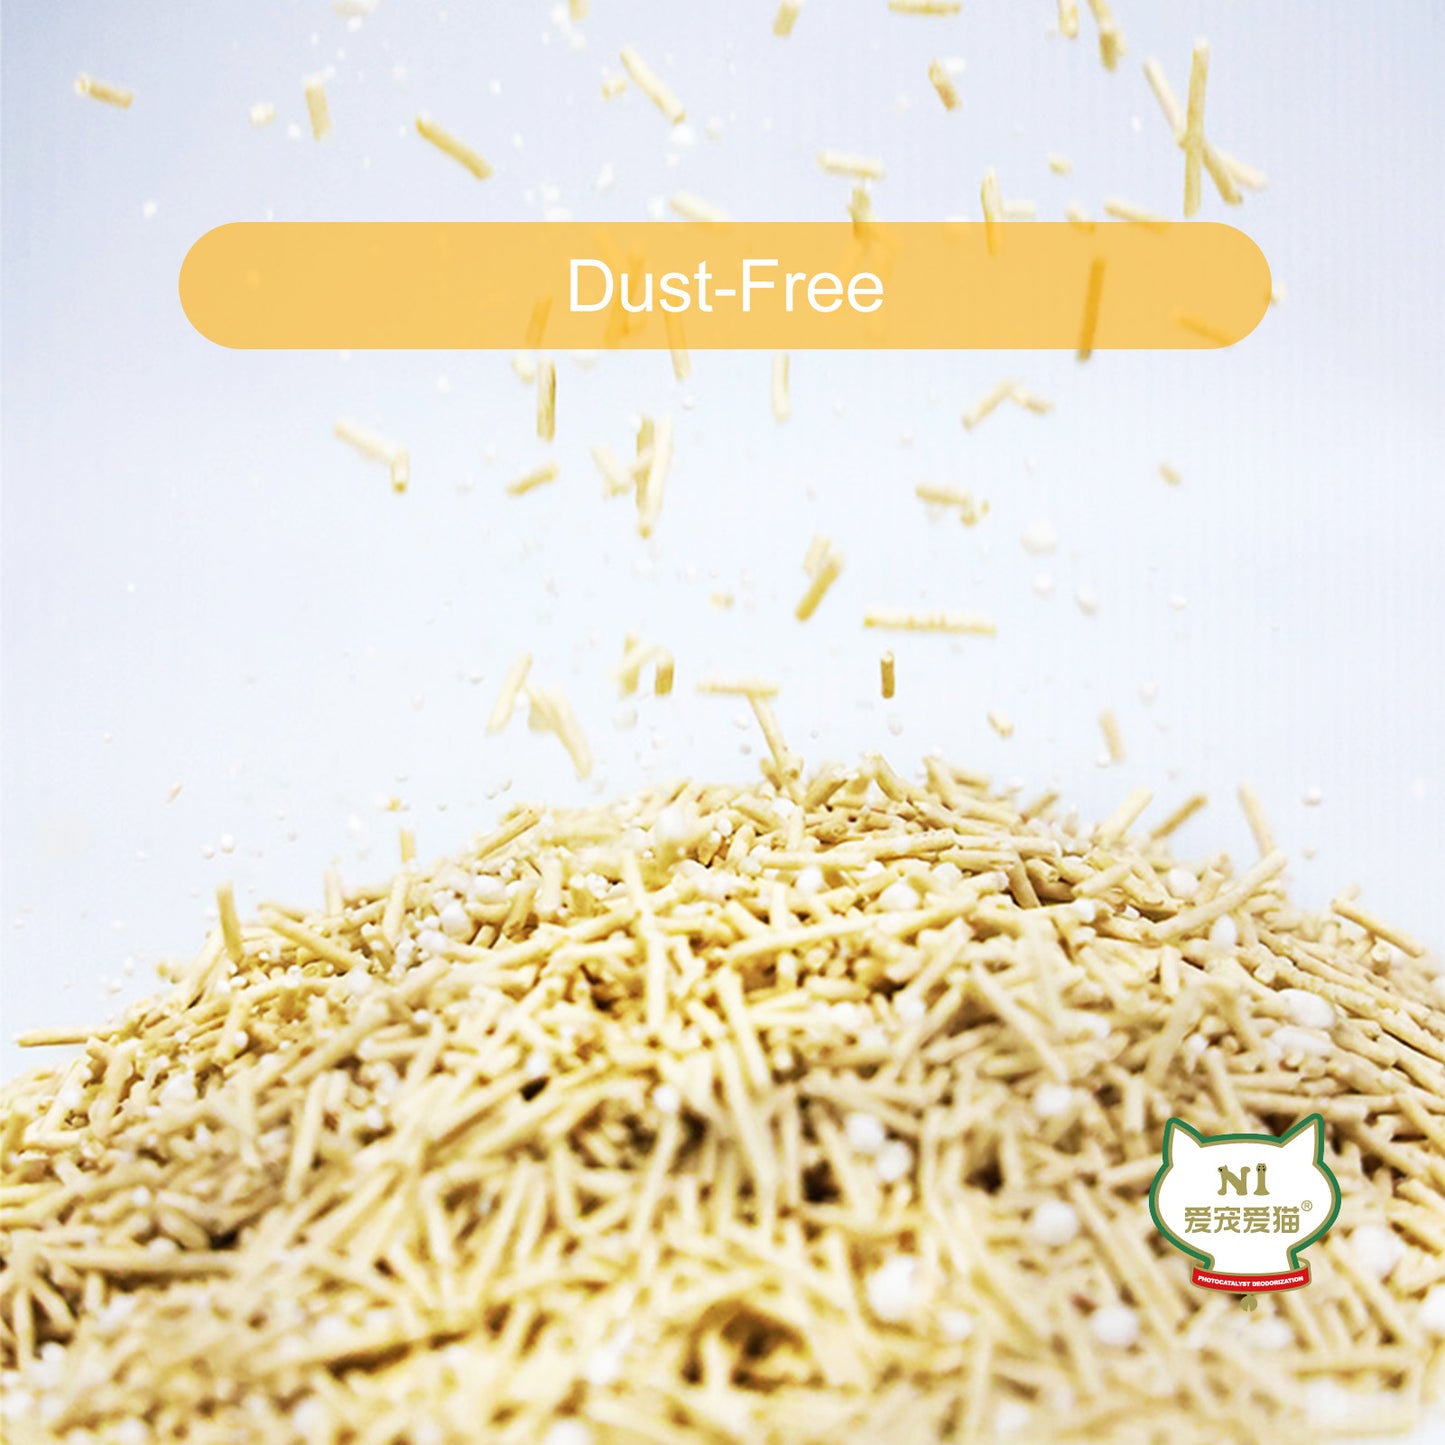 N1 Tofu & Cassava Cat Litter - New Product Sales | Flushable | 99% Dust Free | Superb Clumping | Eliminate 96% of Ammonia | Plant Based | Low Tracking (14lb)